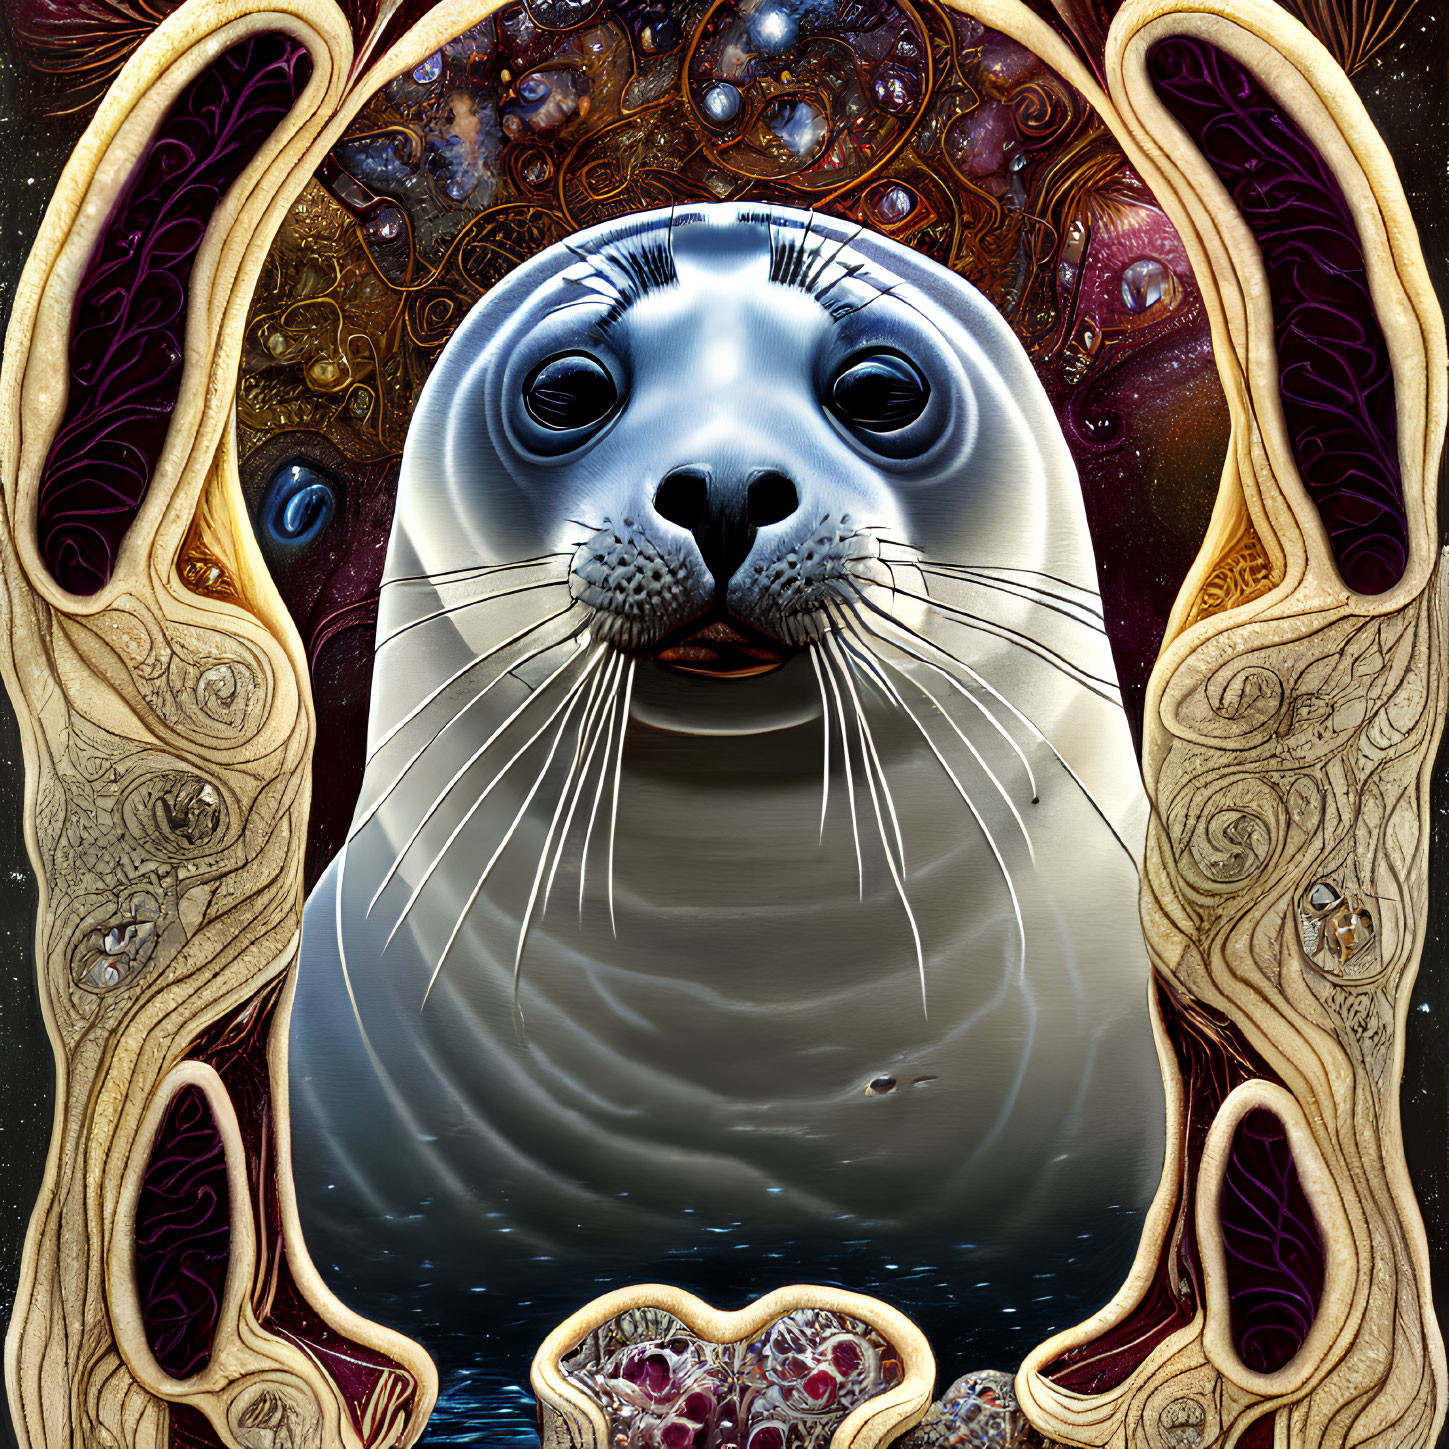 Stylized seal with cosmic background and golden ornate elements